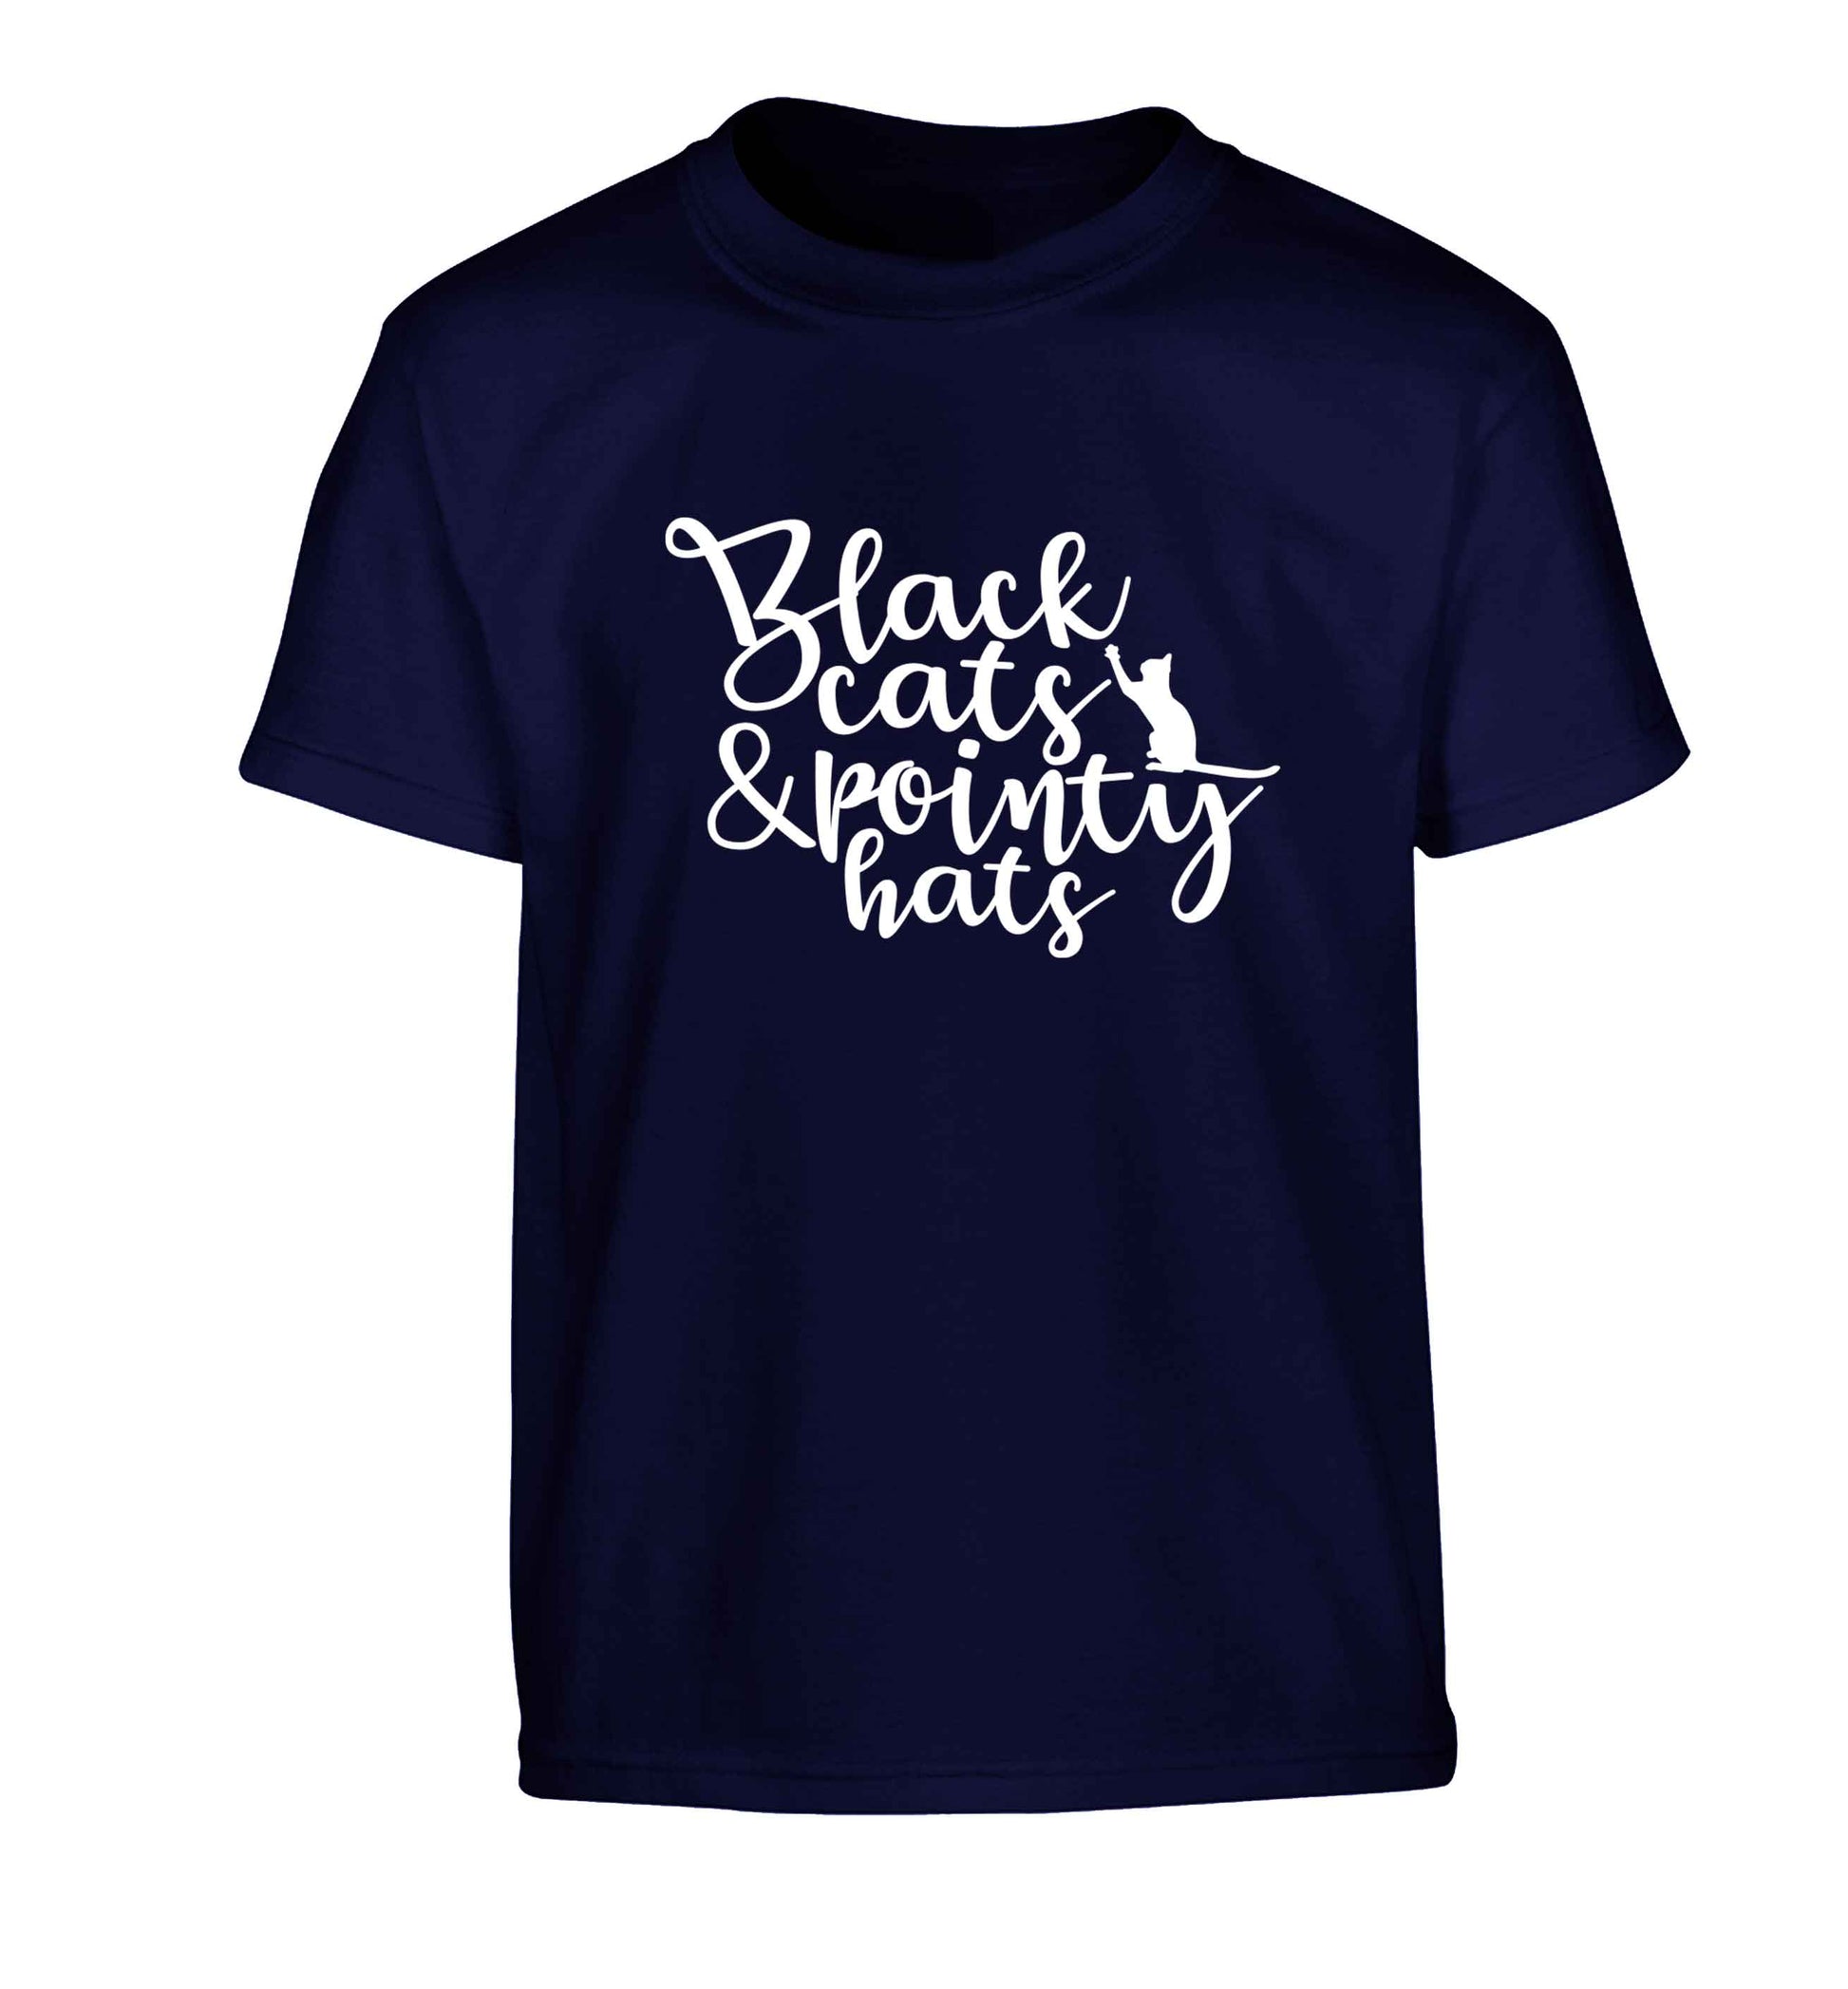 Black cats and pointy hats Children's navy Tshirt 12-13 Years